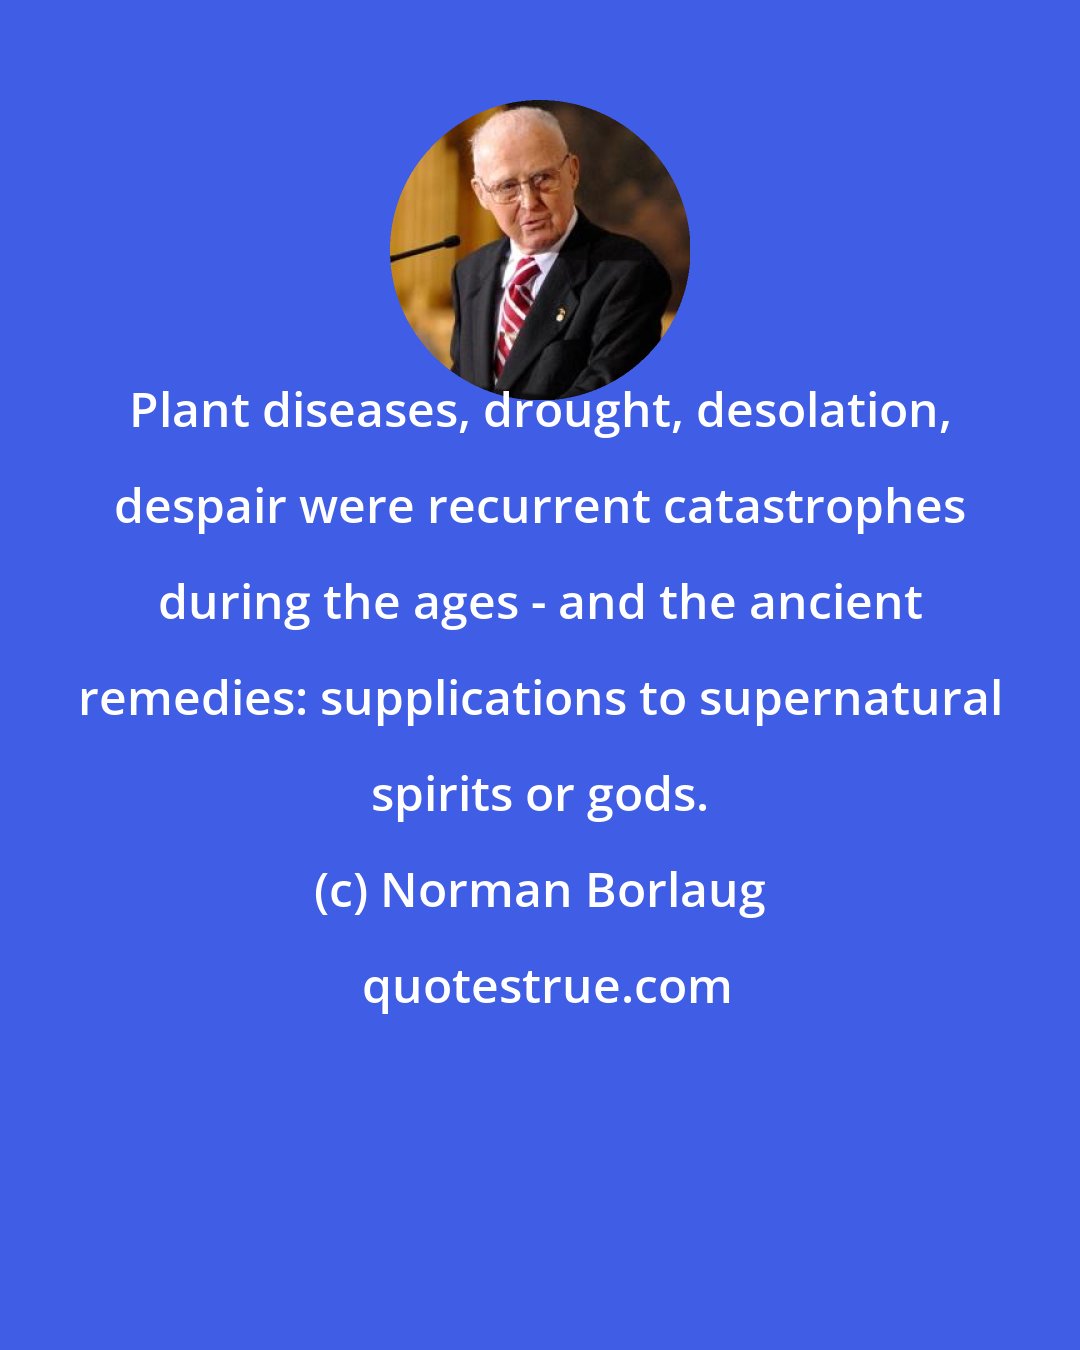 Norman Borlaug: Plant diseases, drought, desolation, despair were recurrent catastrophes during the ages - and the ancient remedies: supplications to supernatural spirits or gods.